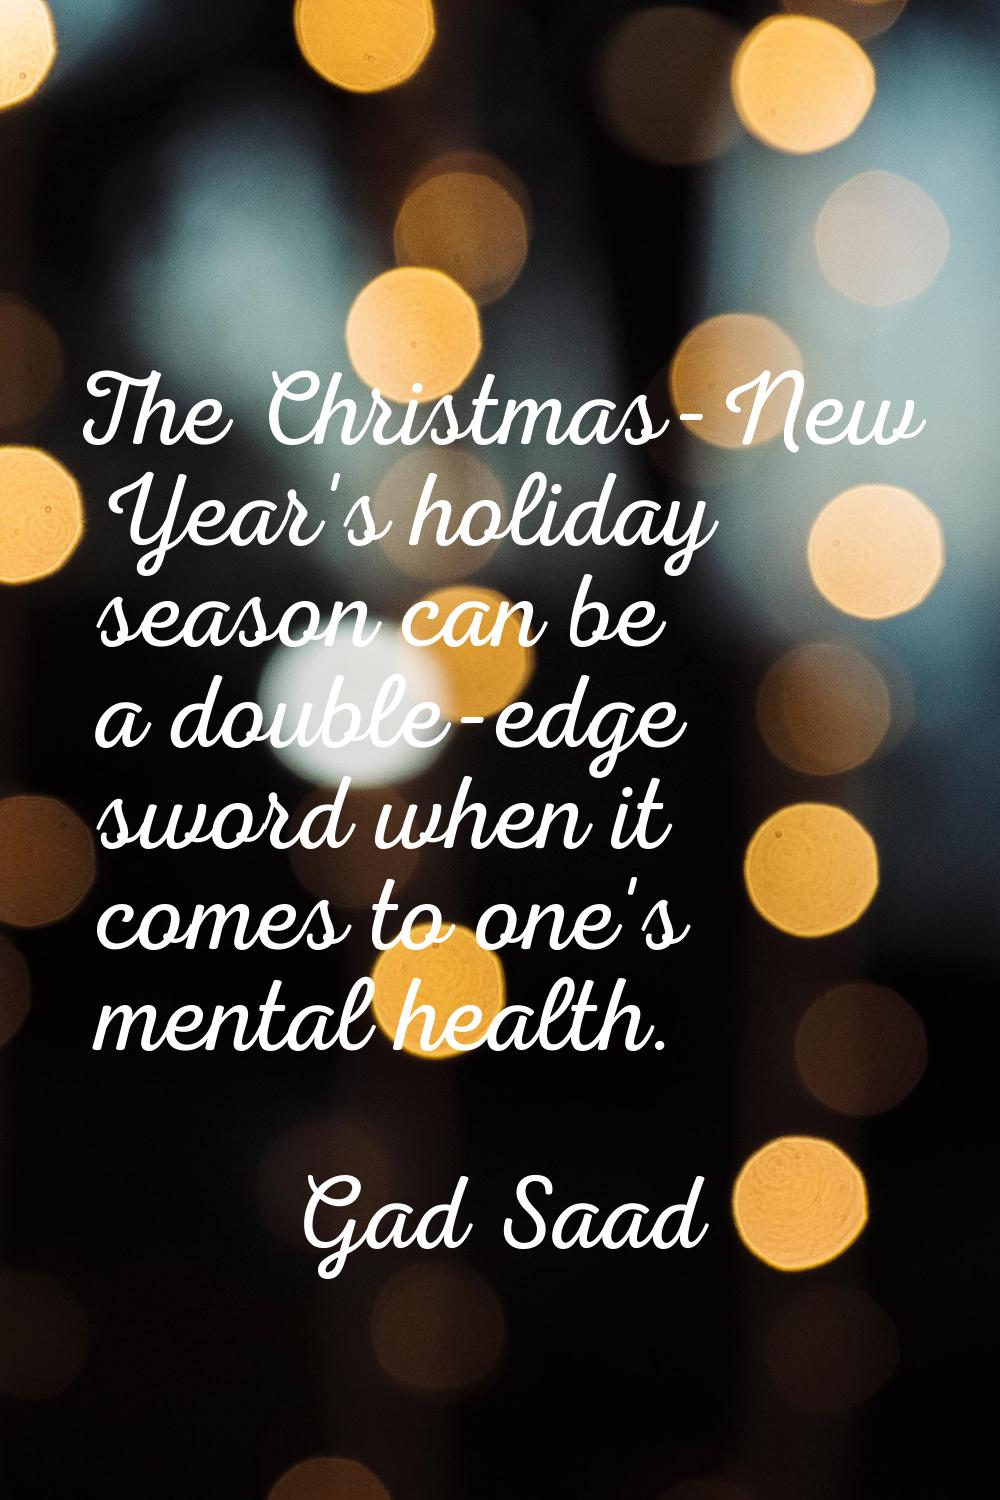 The Christmas-New Year's holiday season can be a double-edge sword when it comes to one's mental he